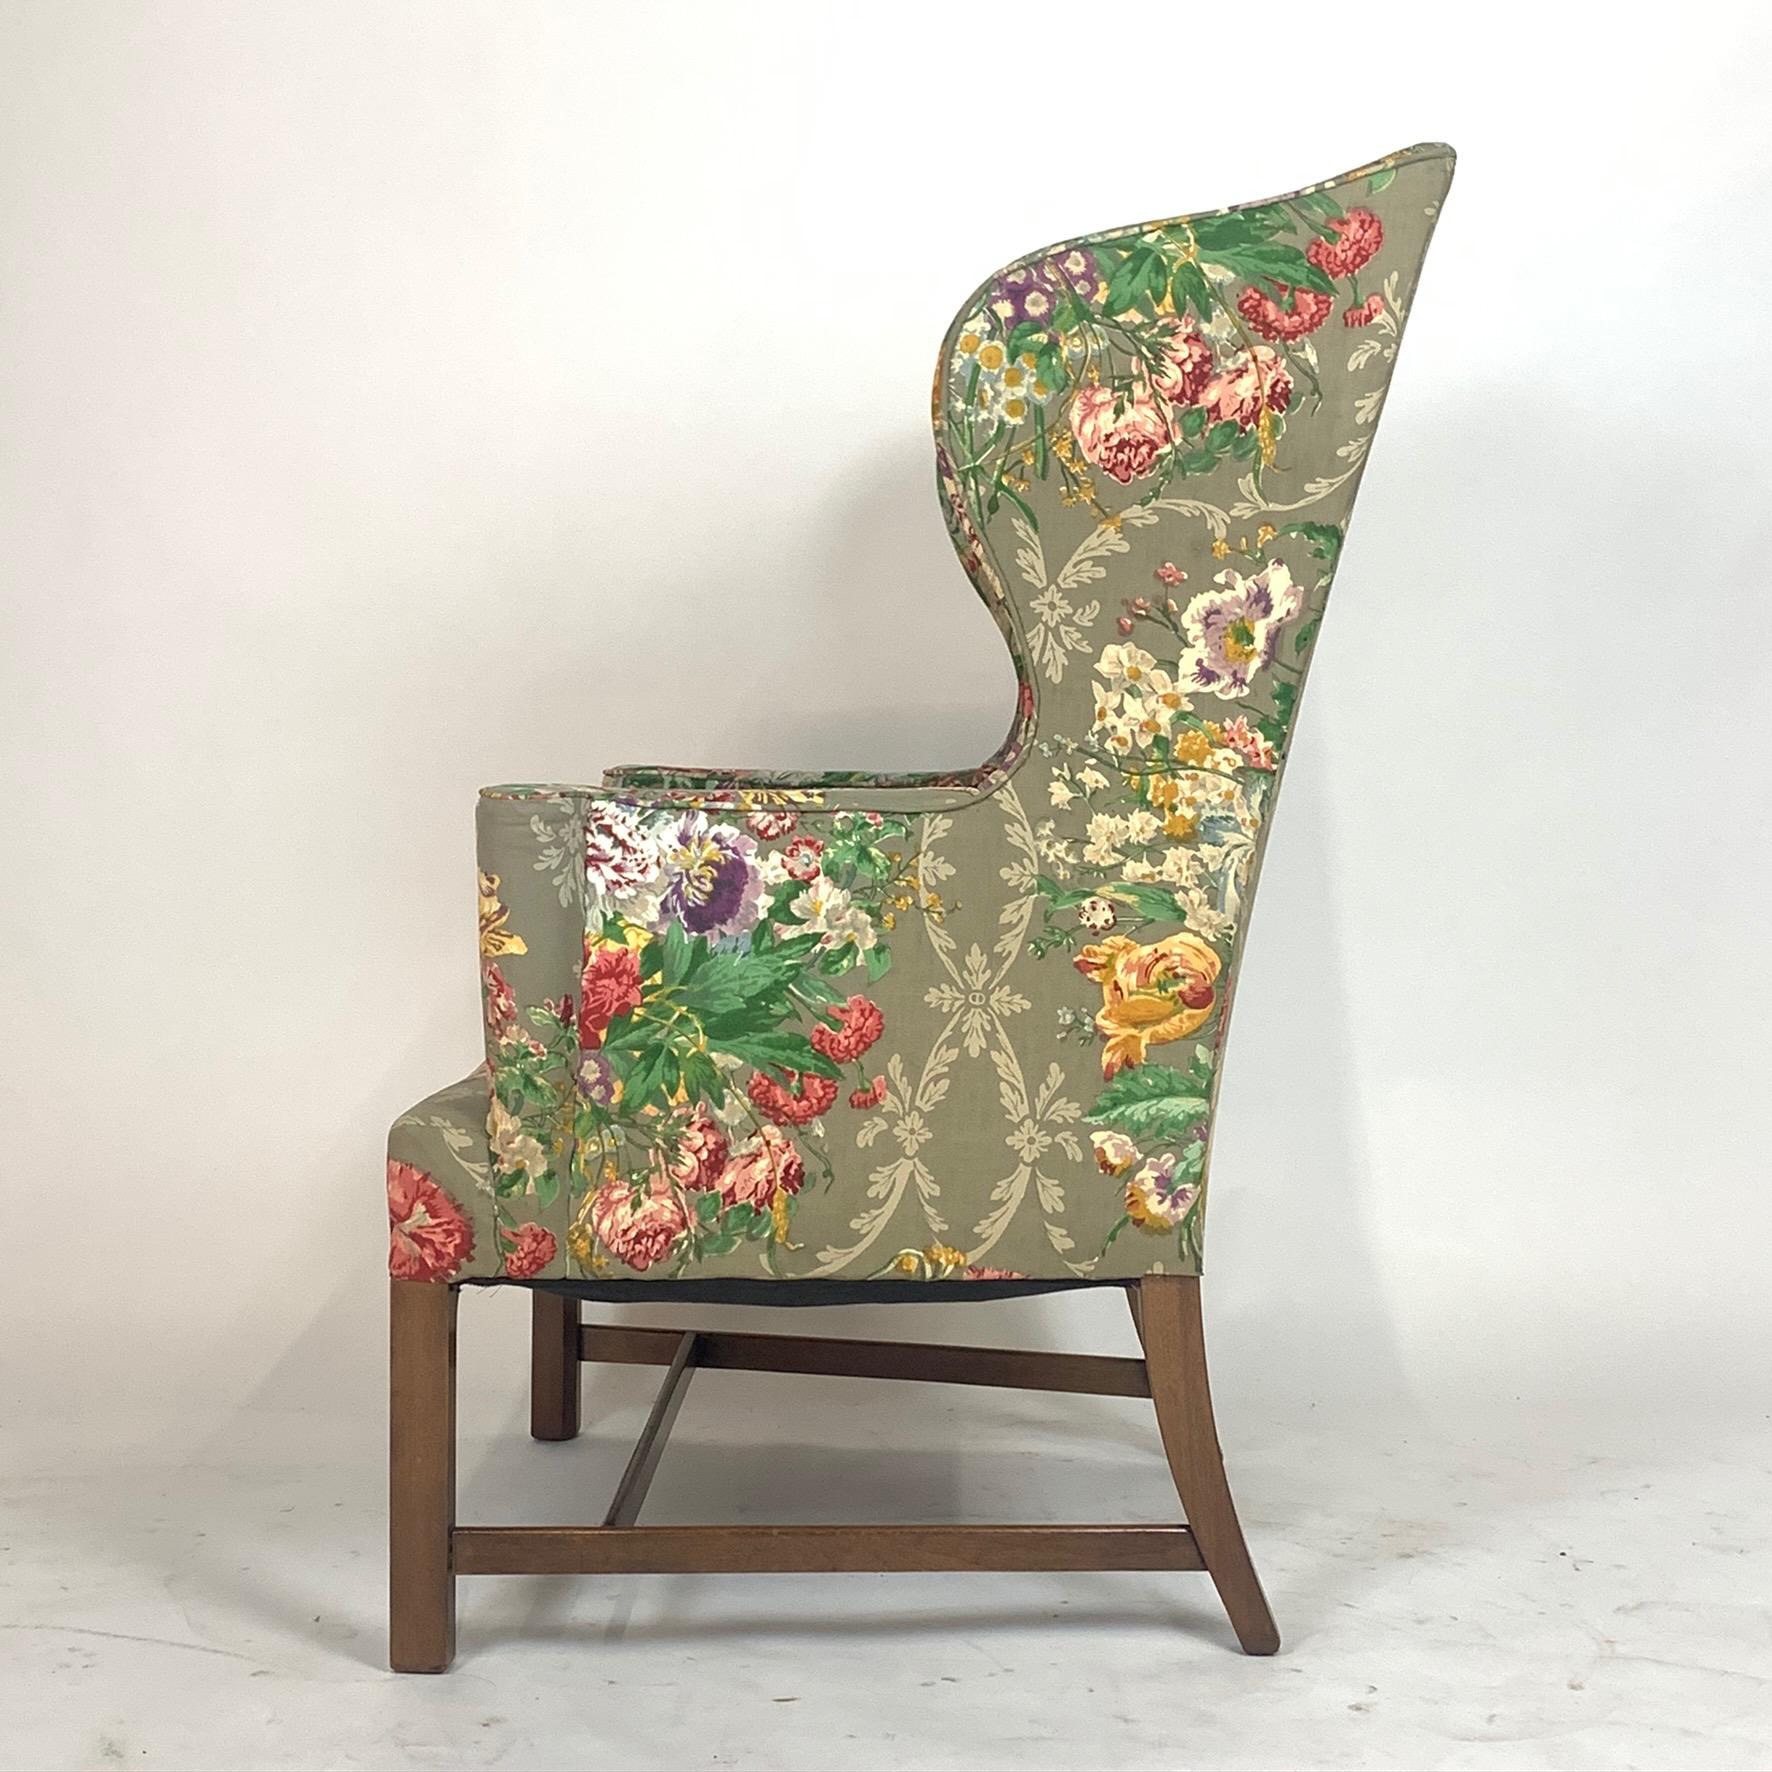 Exceptional Early American Wingback Chairs with Stunning Floral Upholstery 9